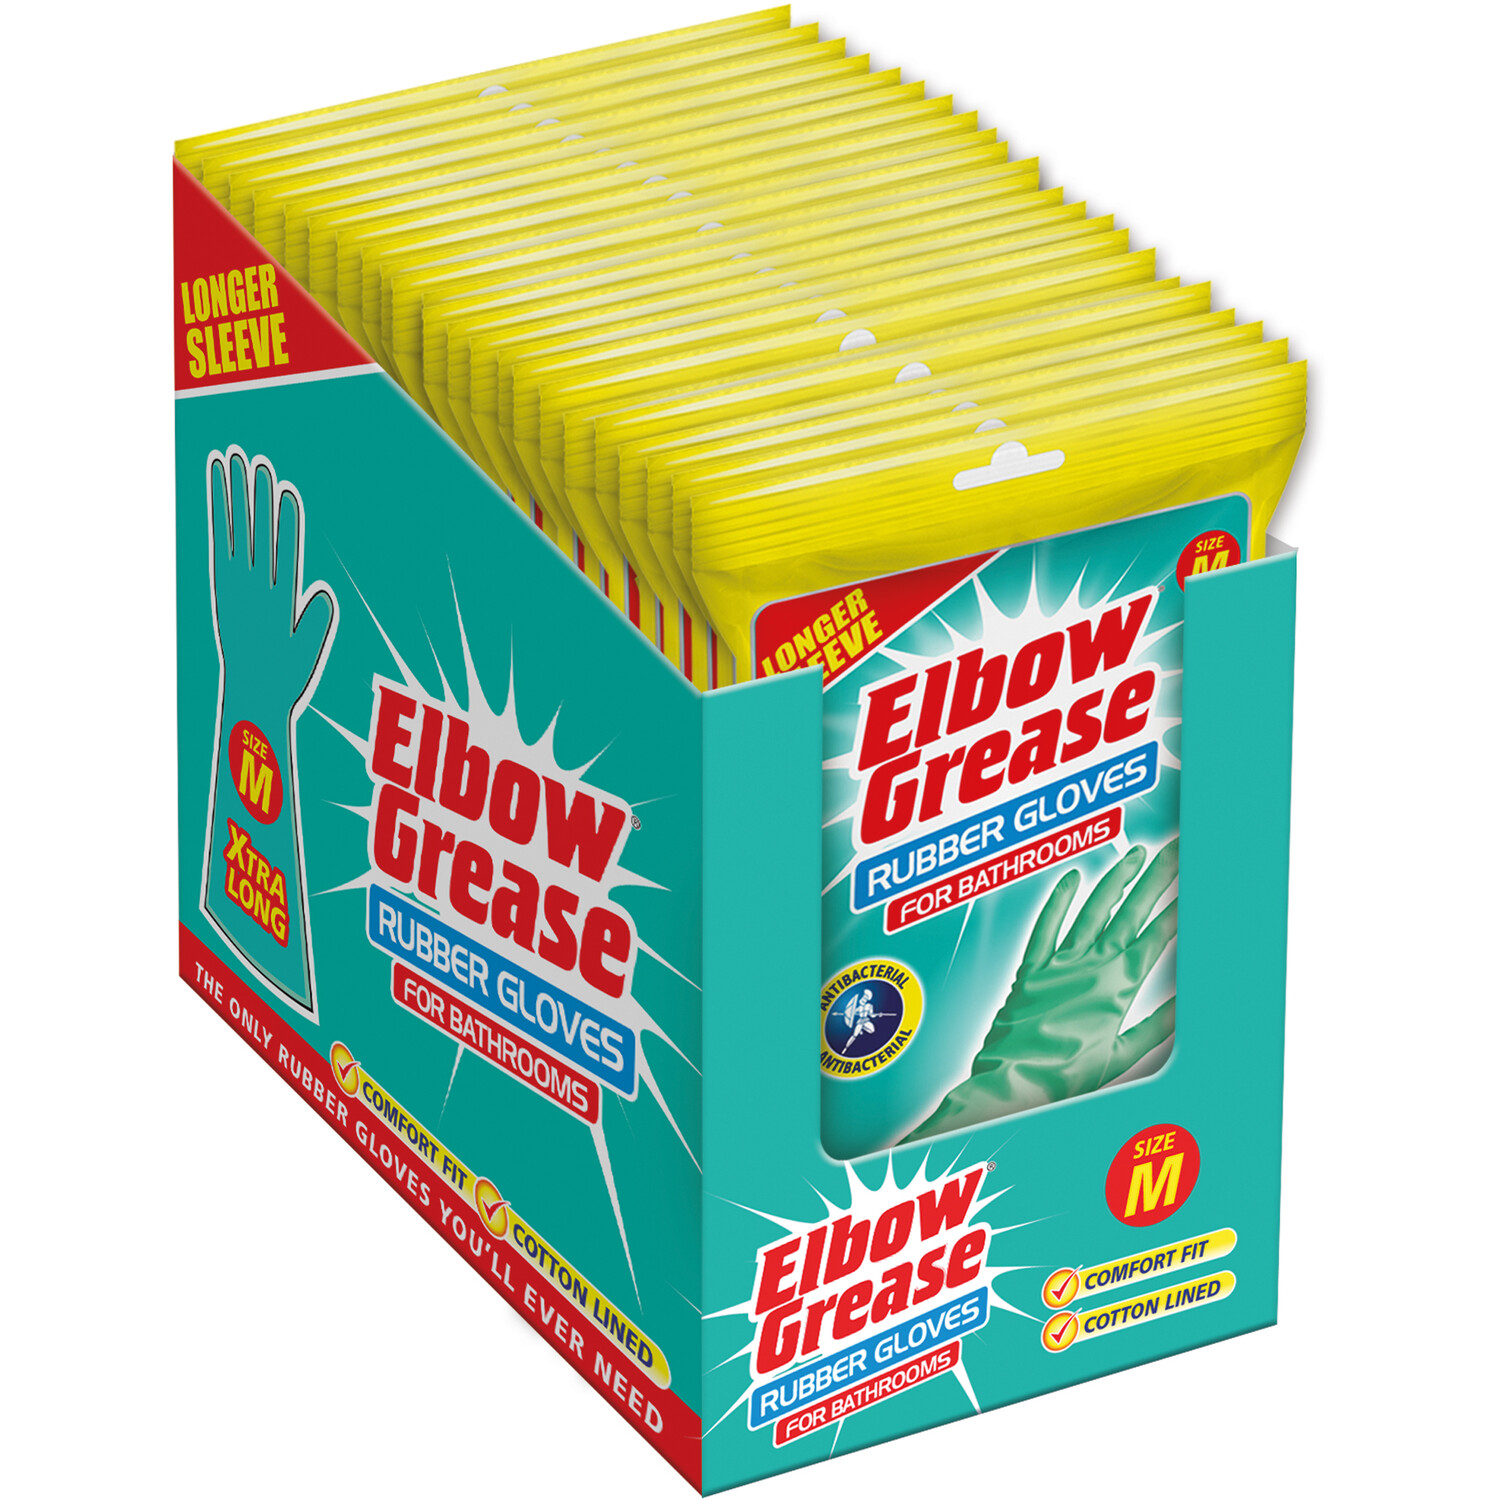 Elbow Grease Rubber Gloves for Bathrooms - Blue Image 2